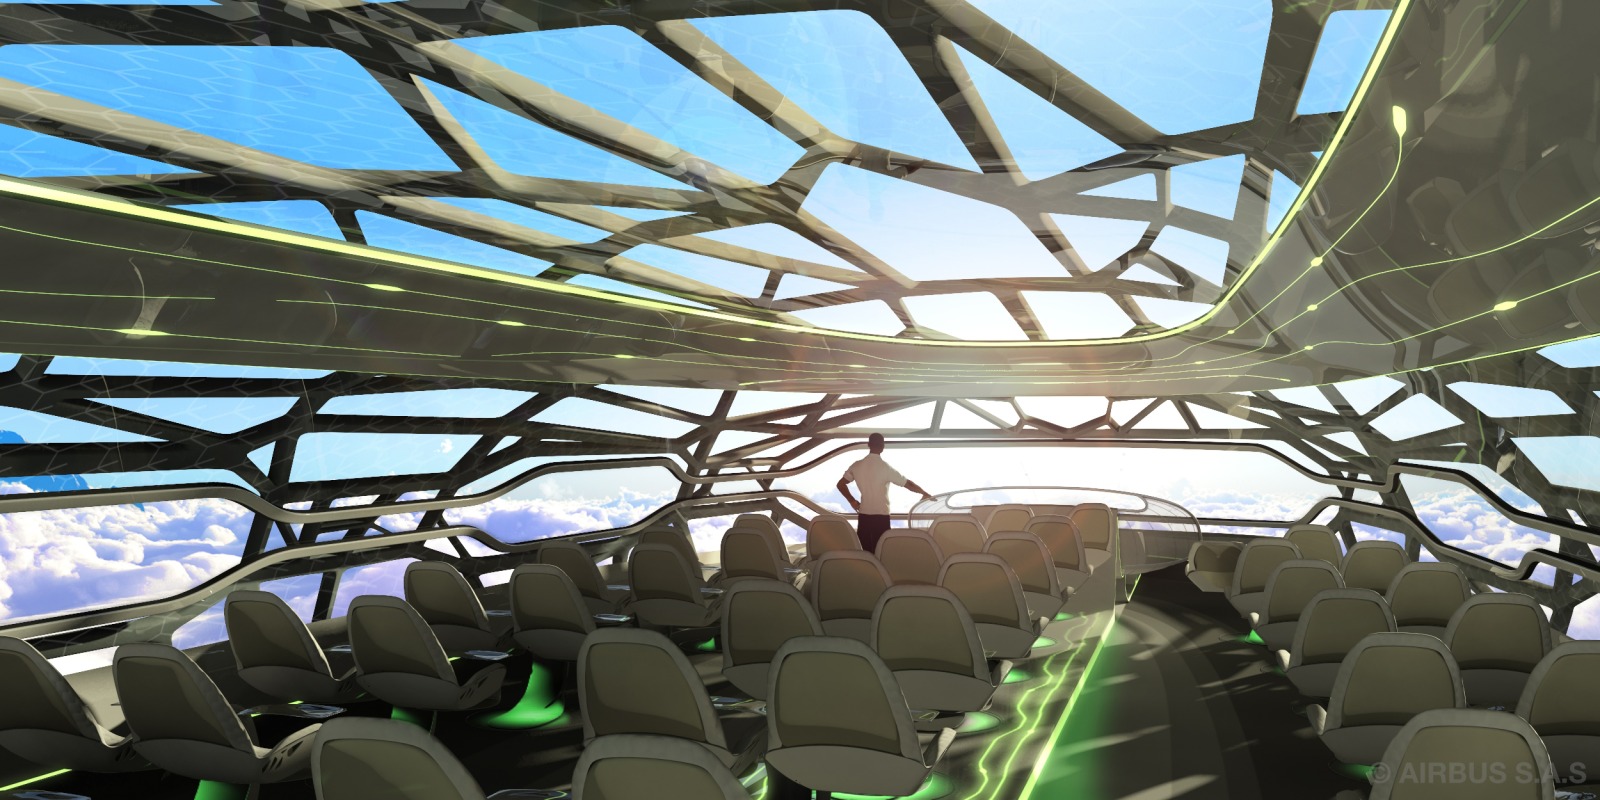 The future by Airbus - The Vitalising Zone by Day